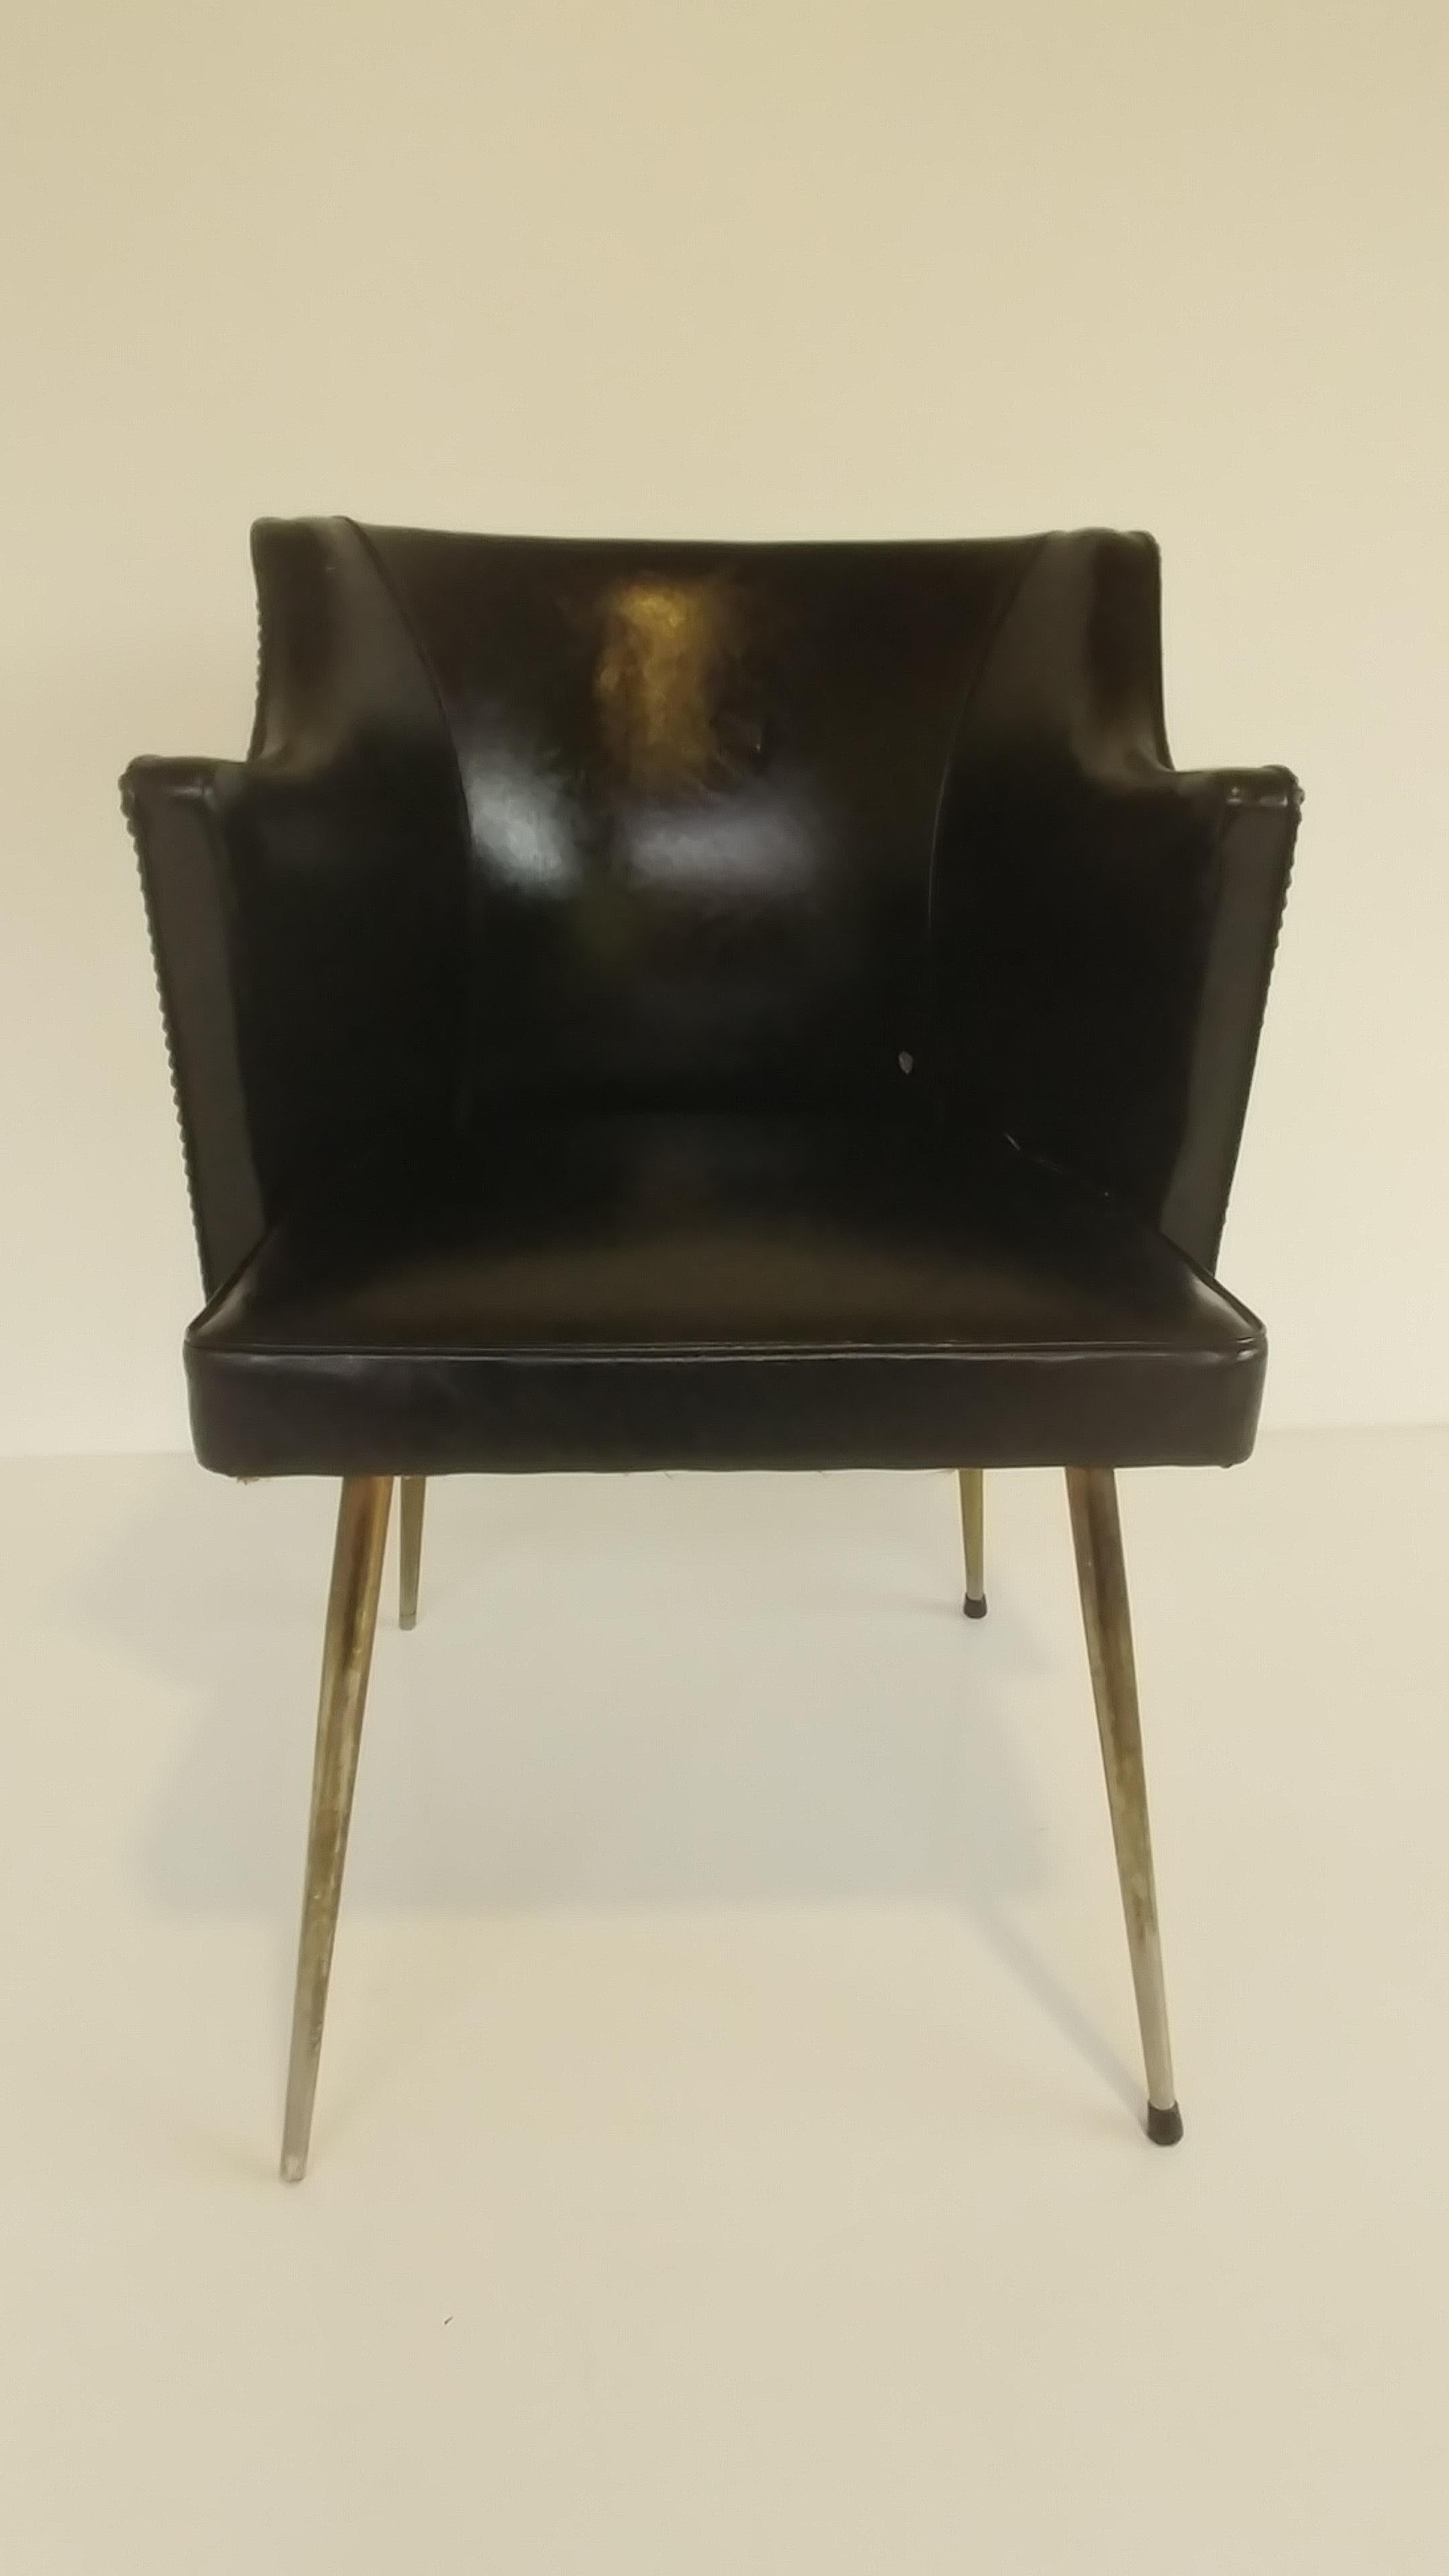 Bruxelles armchair from 1960, Czech Republic.

Highly recommended item will be perfect complementation of the rooms in not only Classic style, but also Art Deco and modern.

The second seat at the twin auction.
We send furniture to every corner